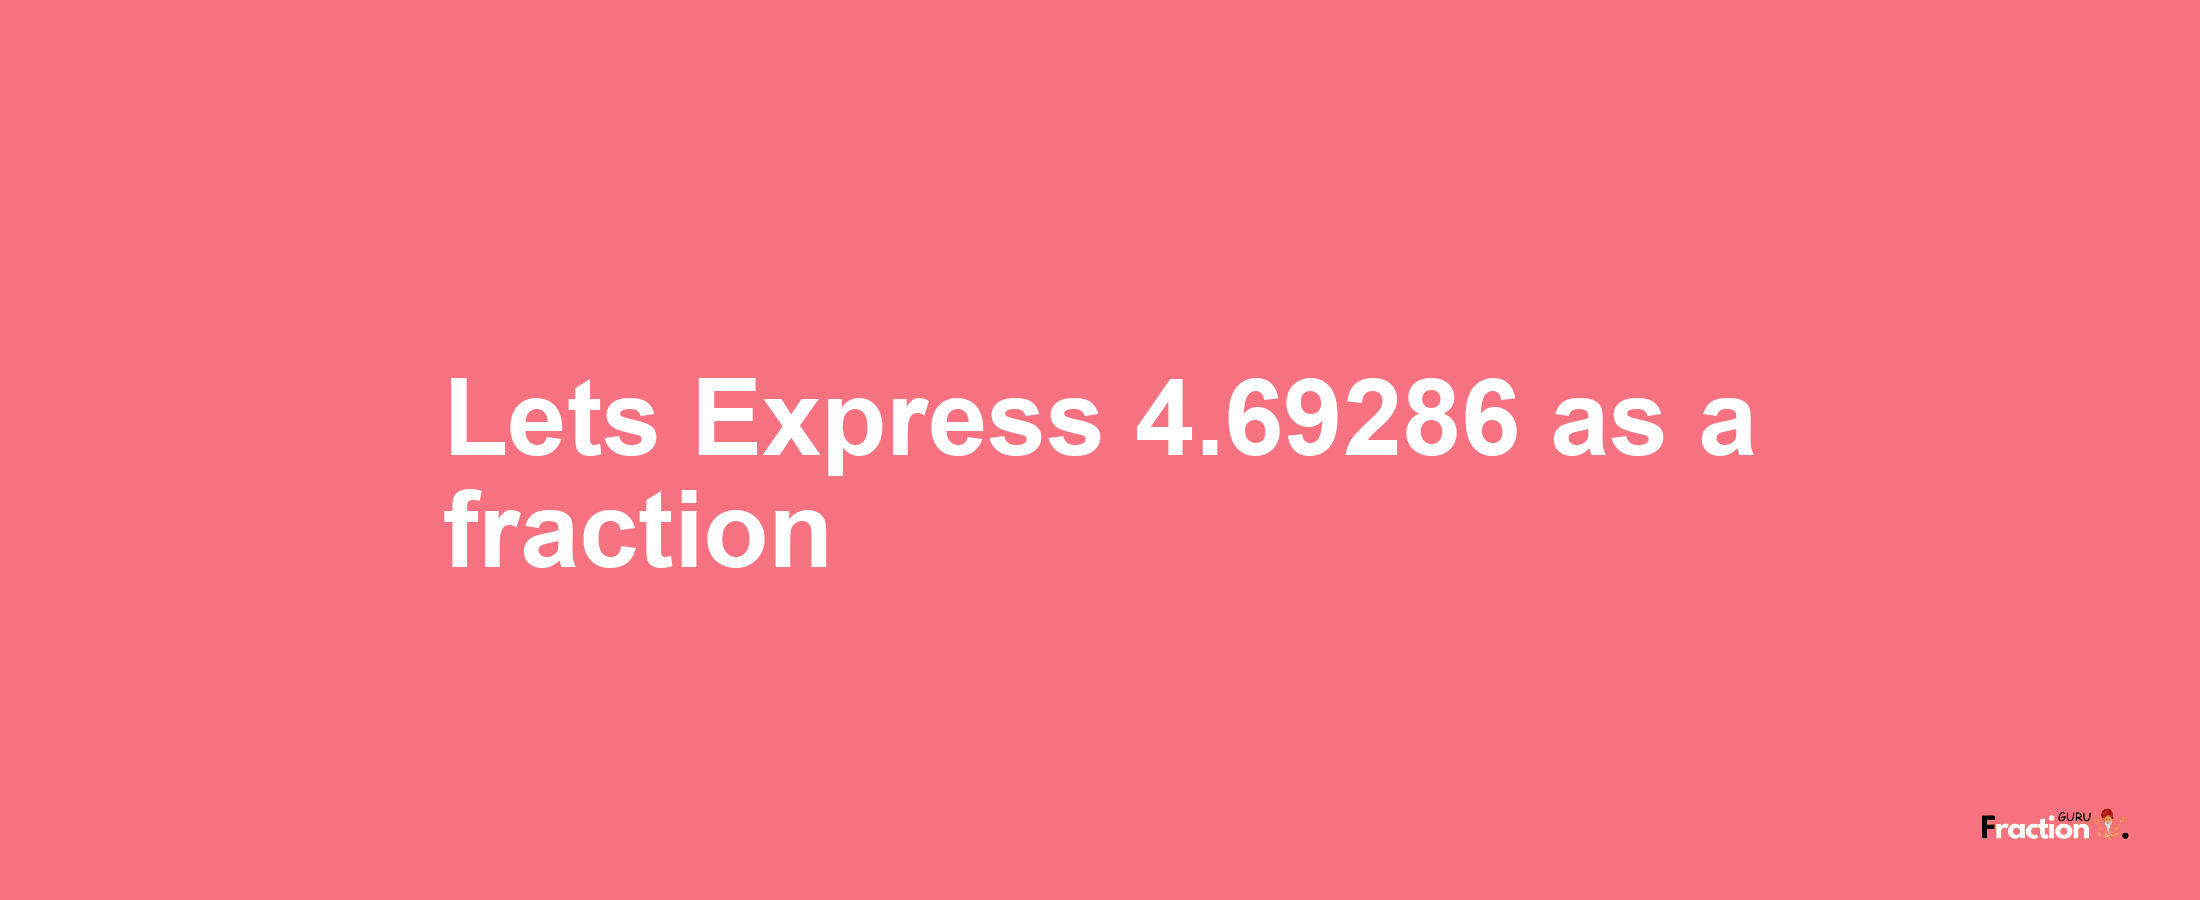 Lets Express 4.69286 as afraction